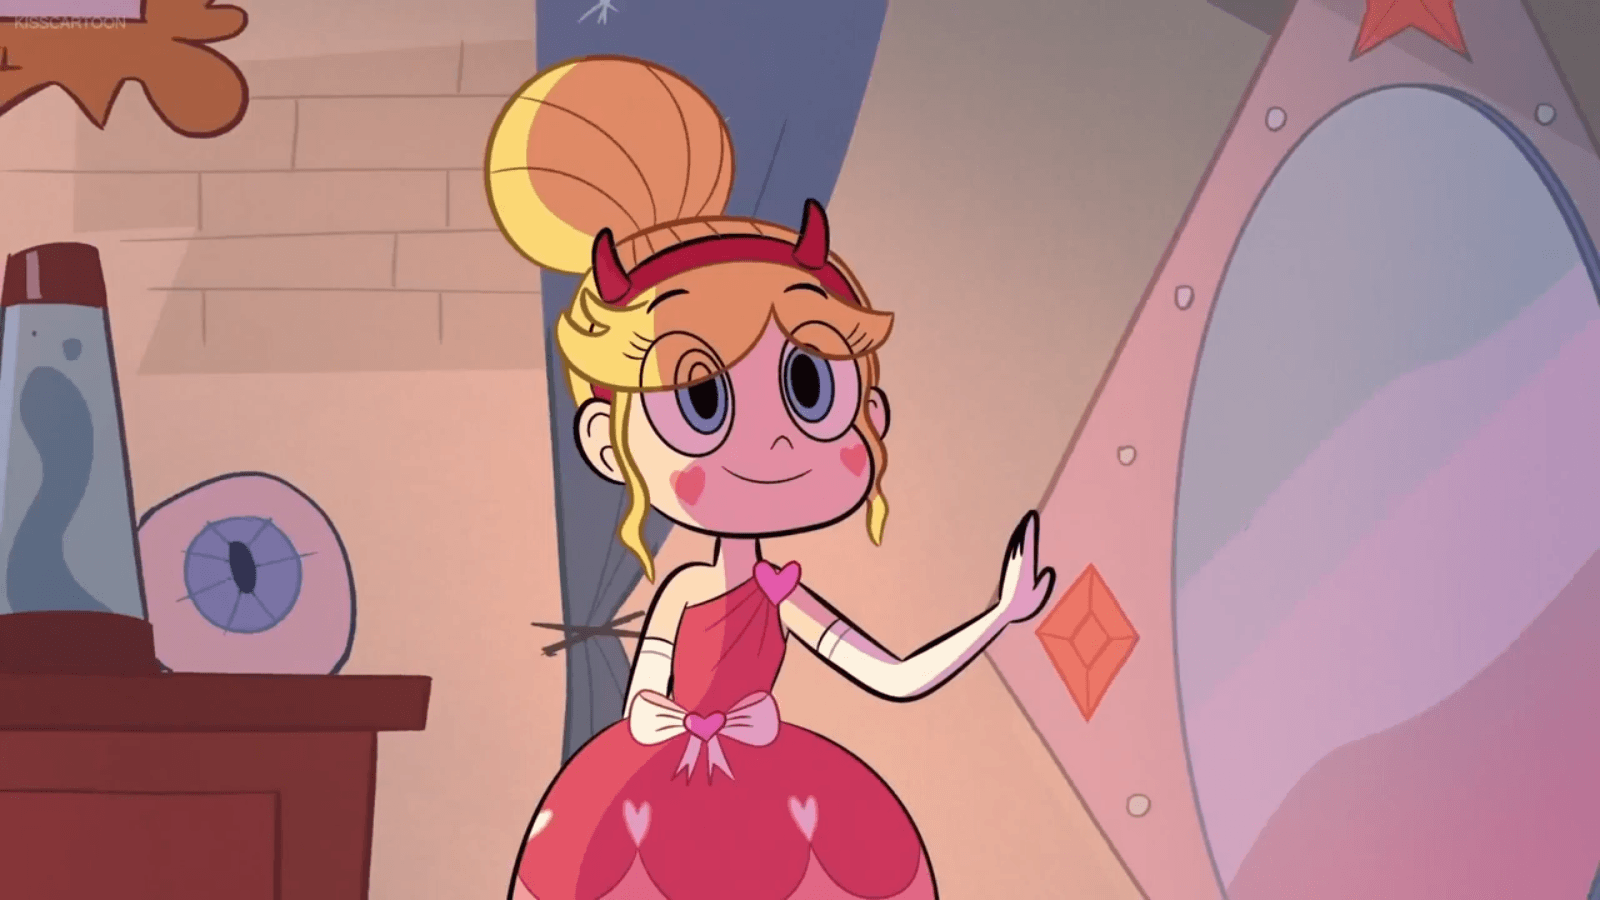 Star Vs. the Forces of Evil Wallpaper!